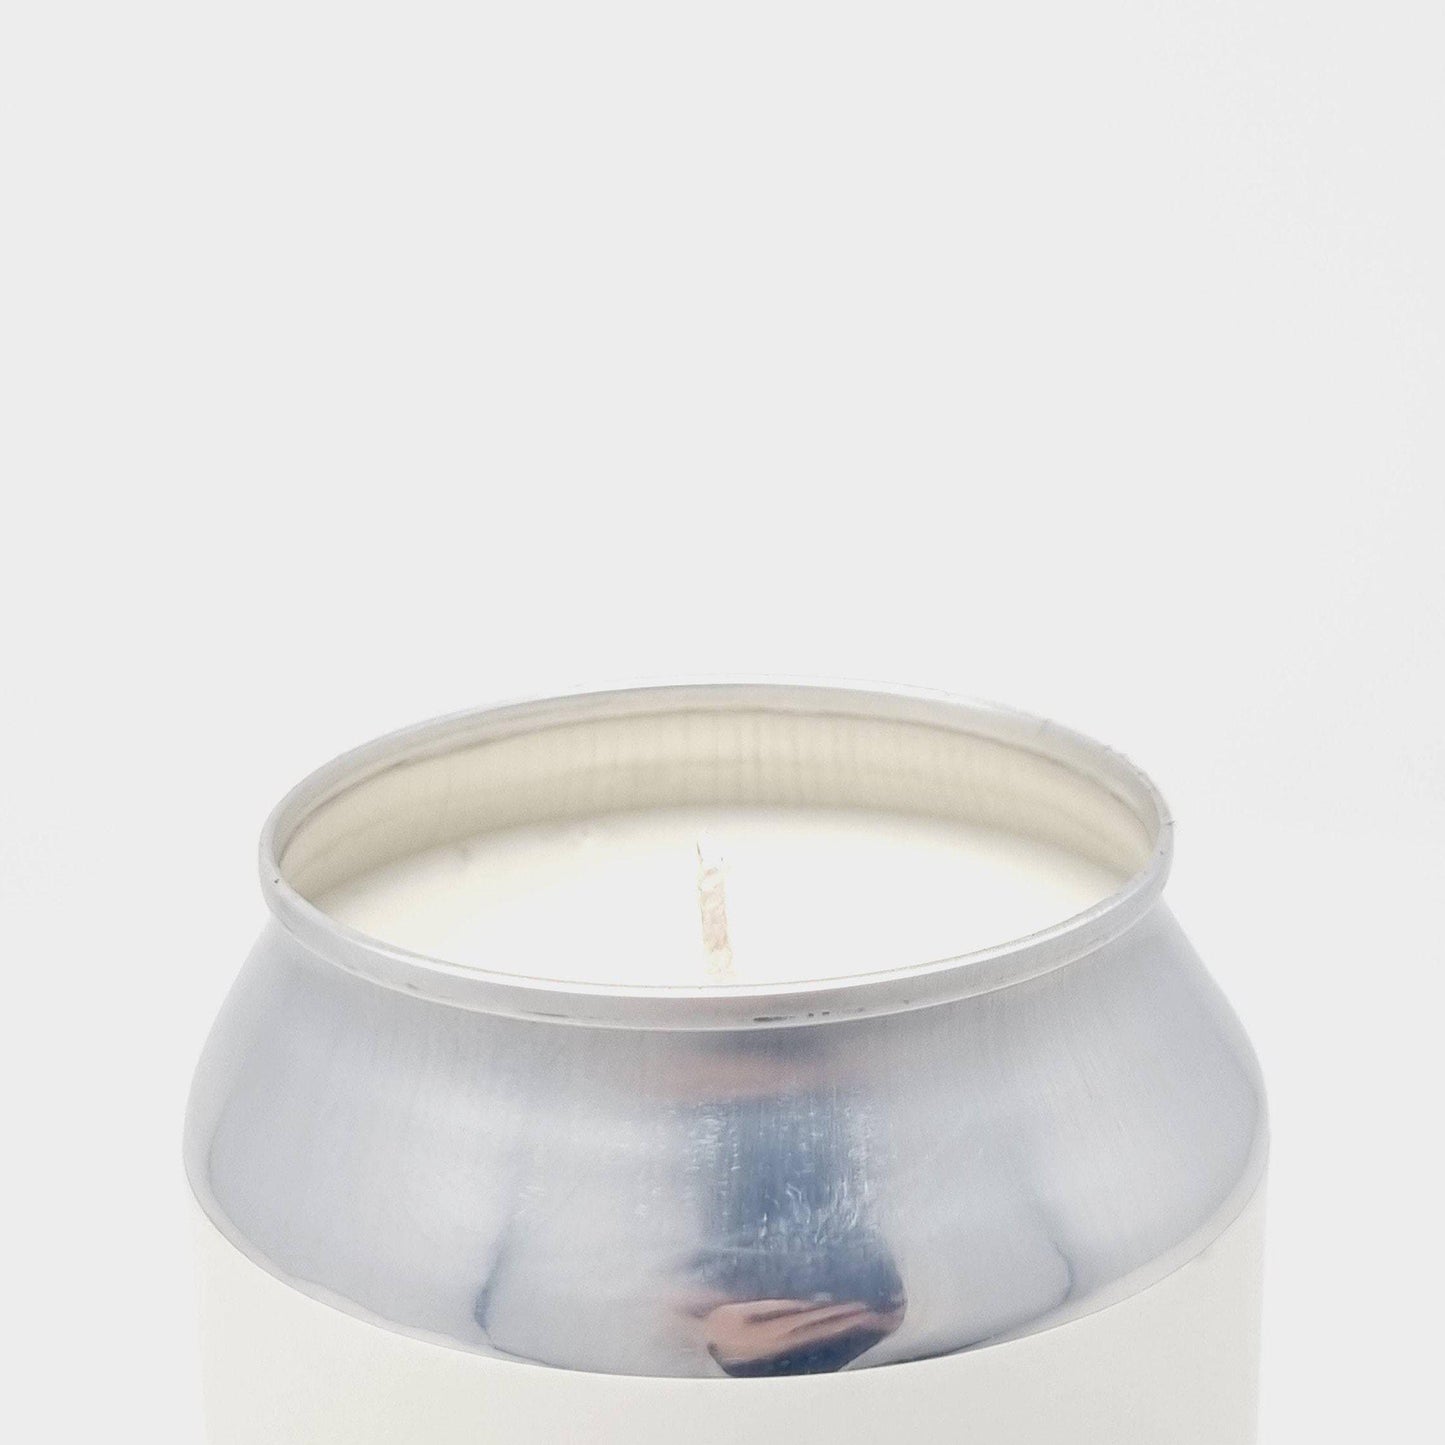 Pollys Uncanny Valley Craft Beer Can Candle-Adhock Homeware